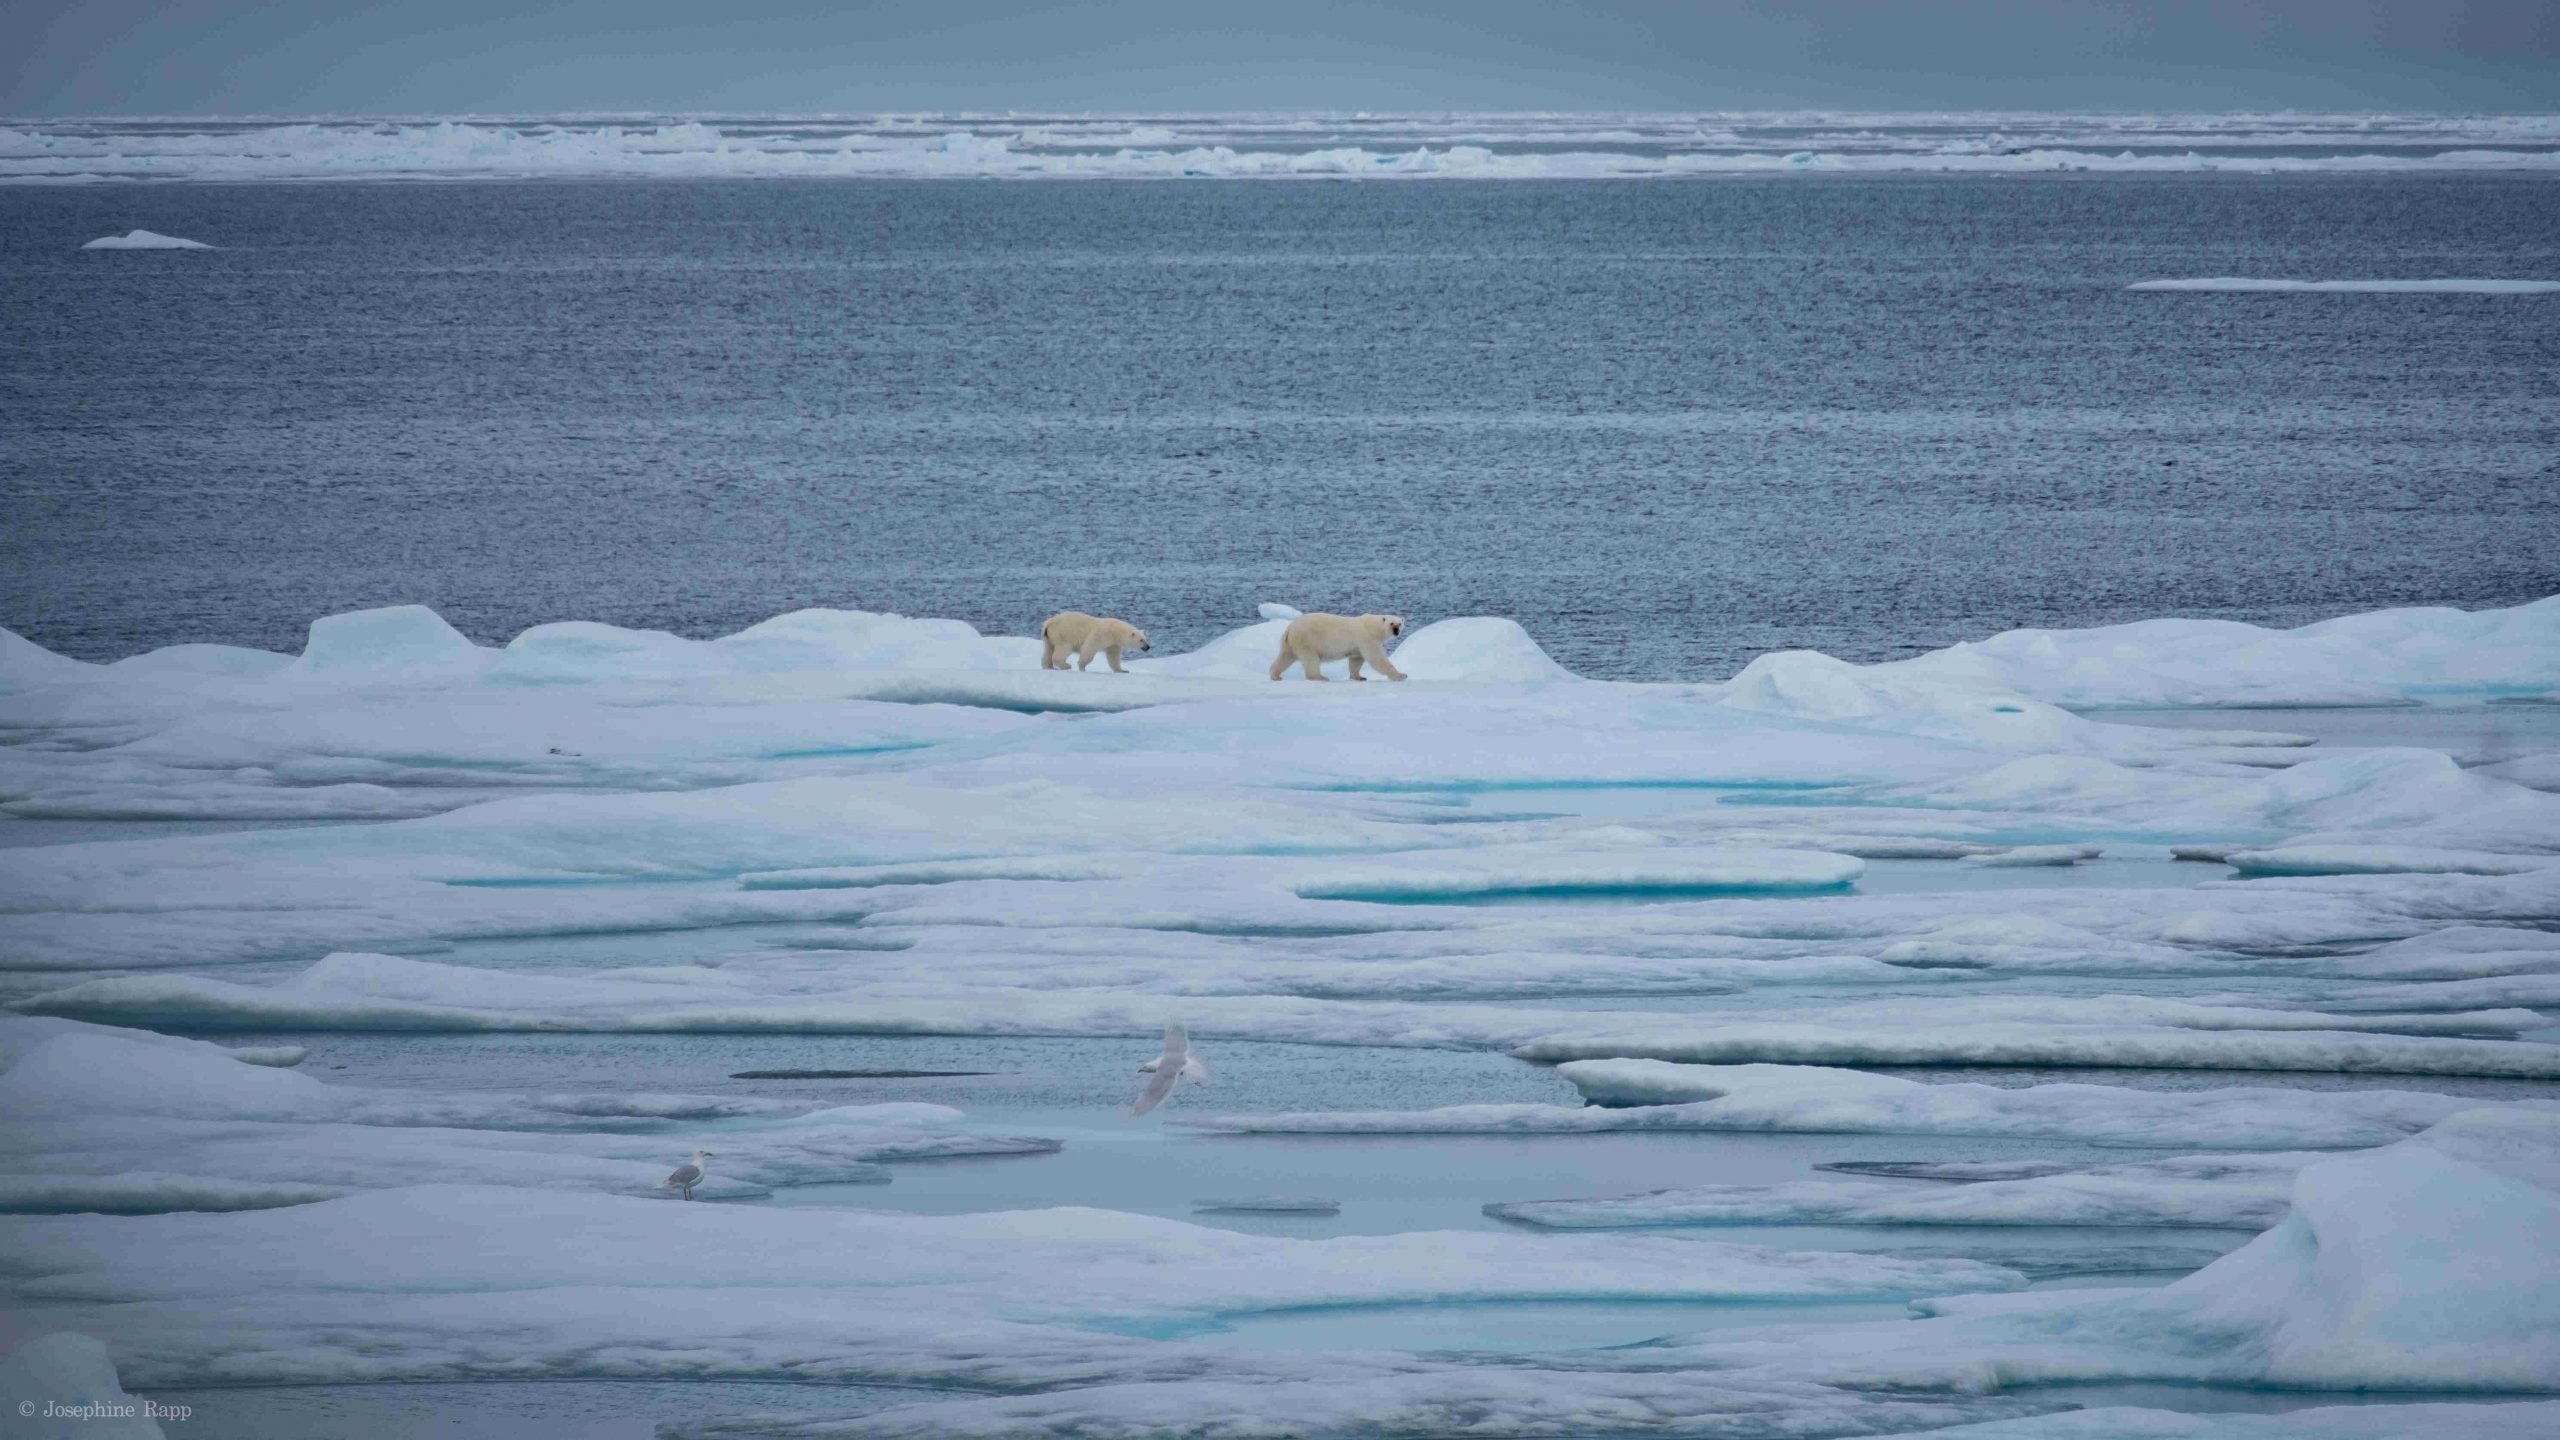 The sixth and seventh polar bears of the day. (Photo: Josephine Rapp)